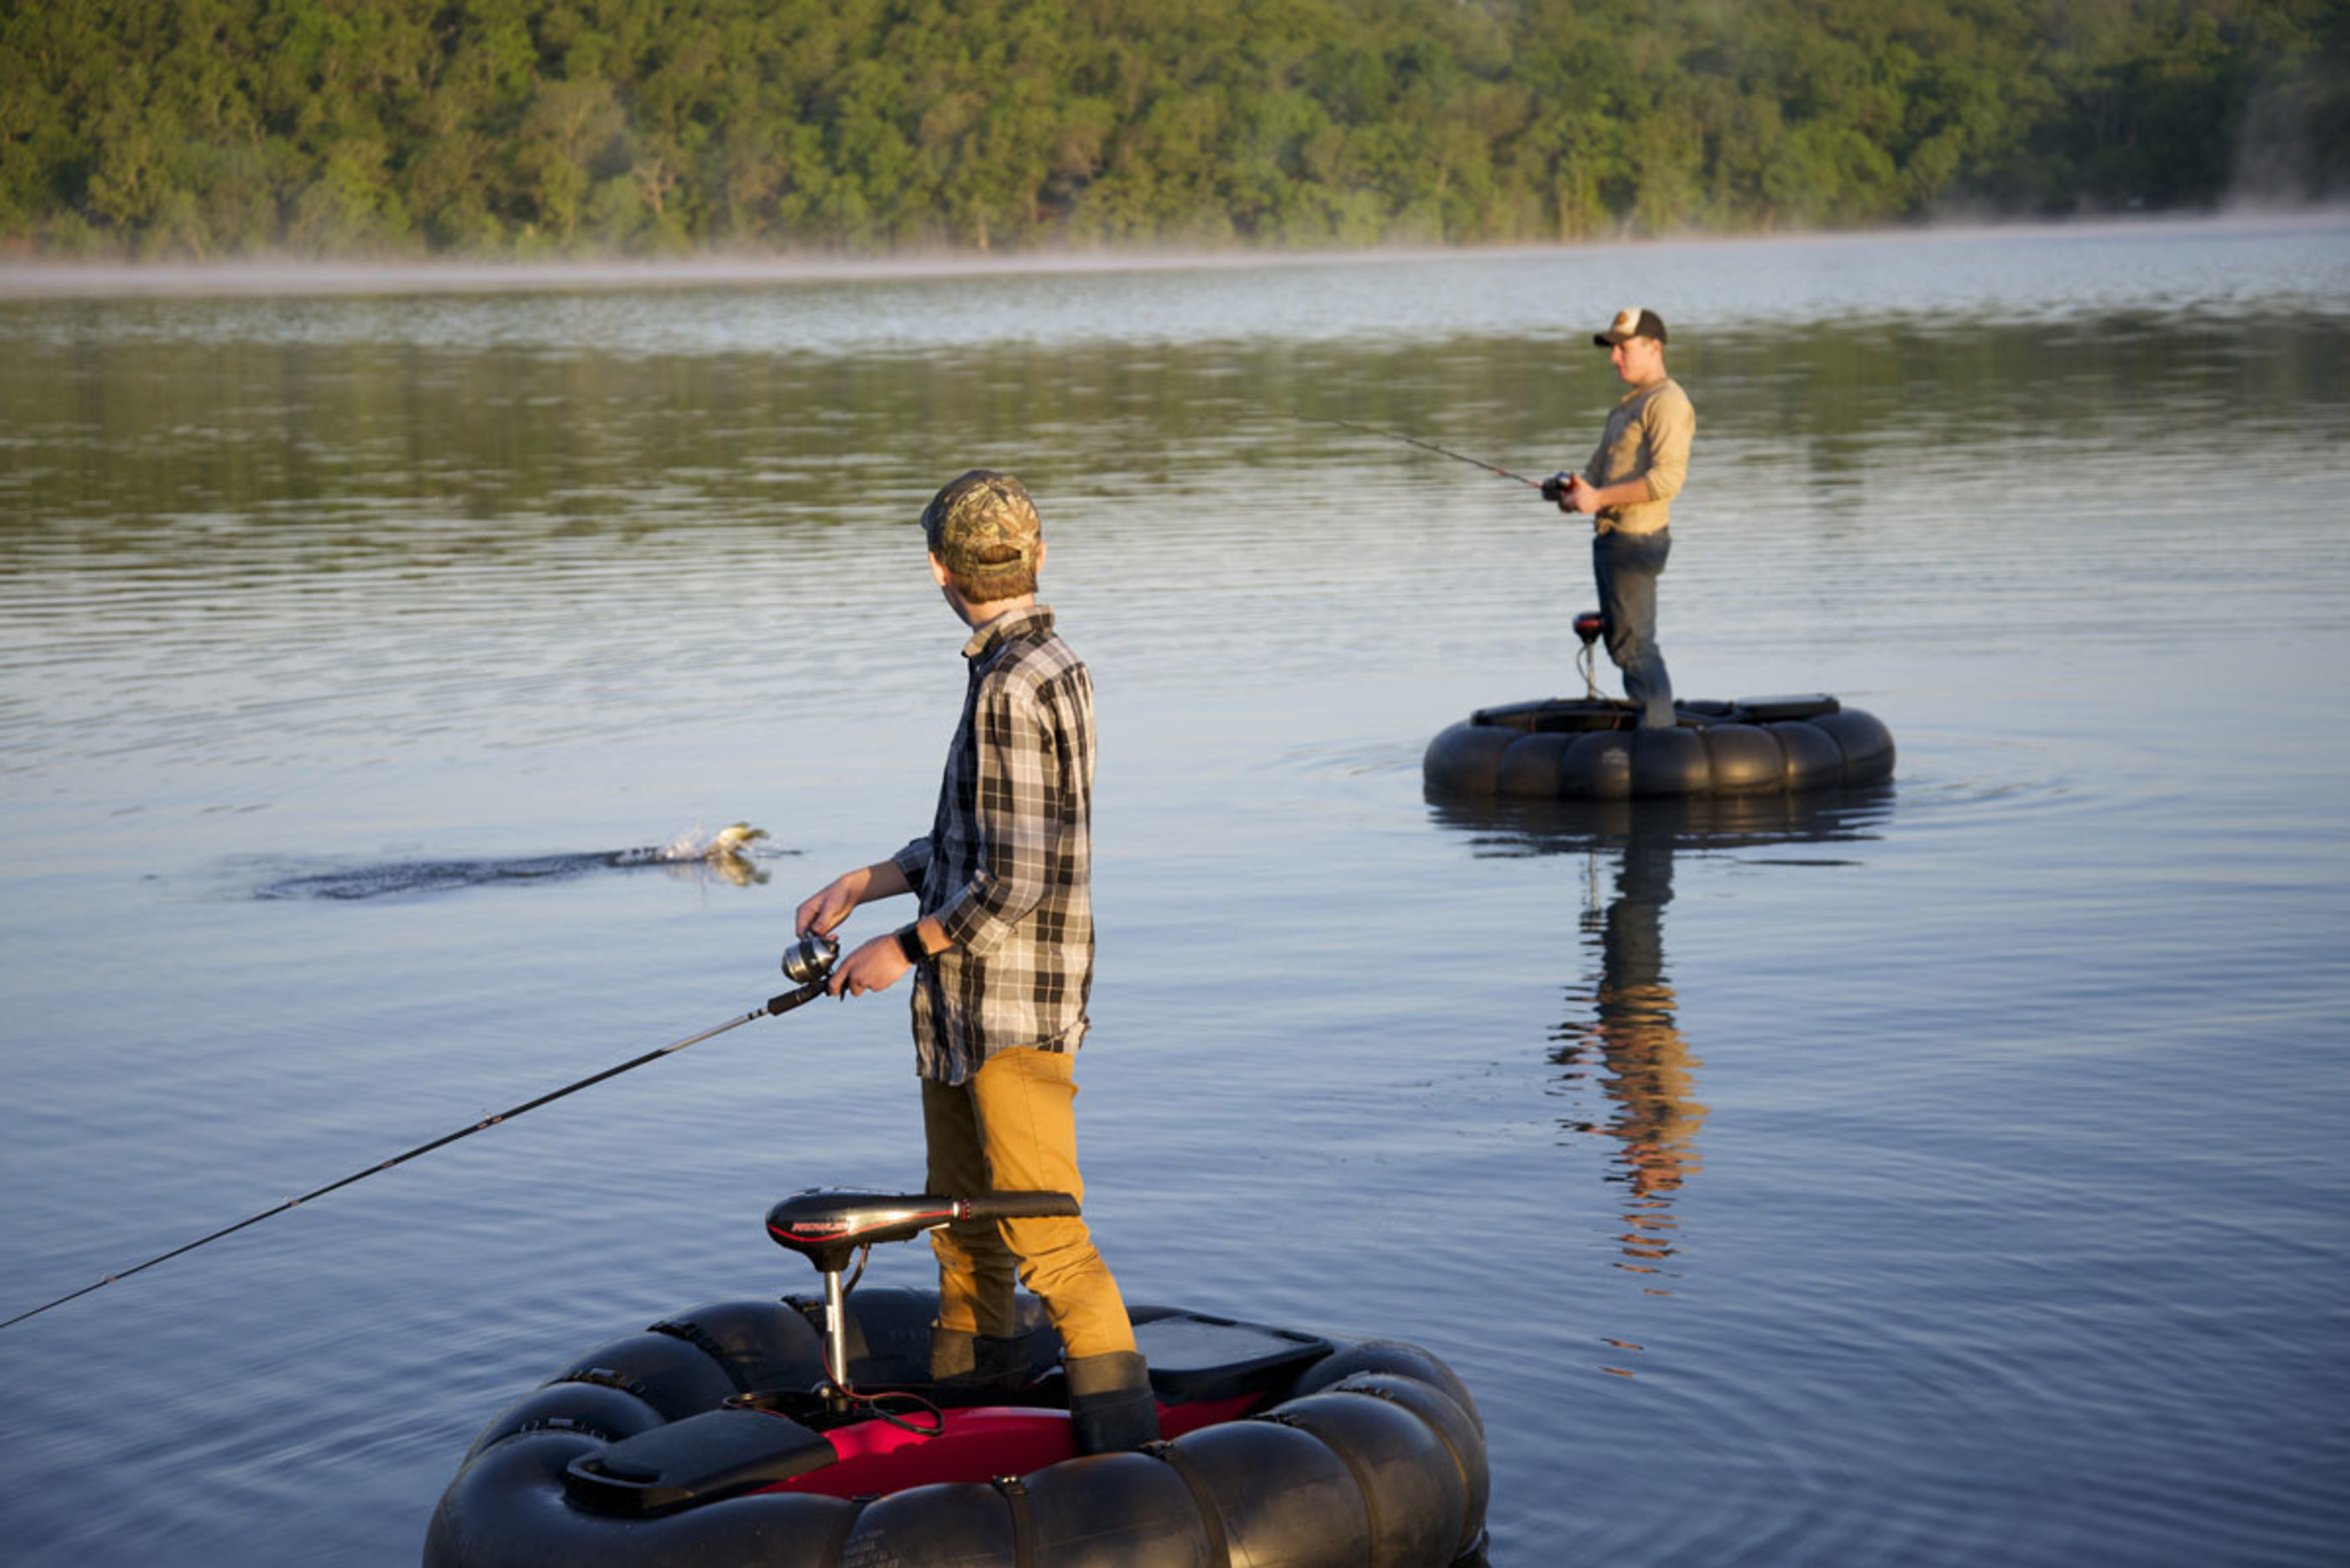 The GoBoat's stable design allows you to stand or sit while casting, trolling or just relaxing on the water.